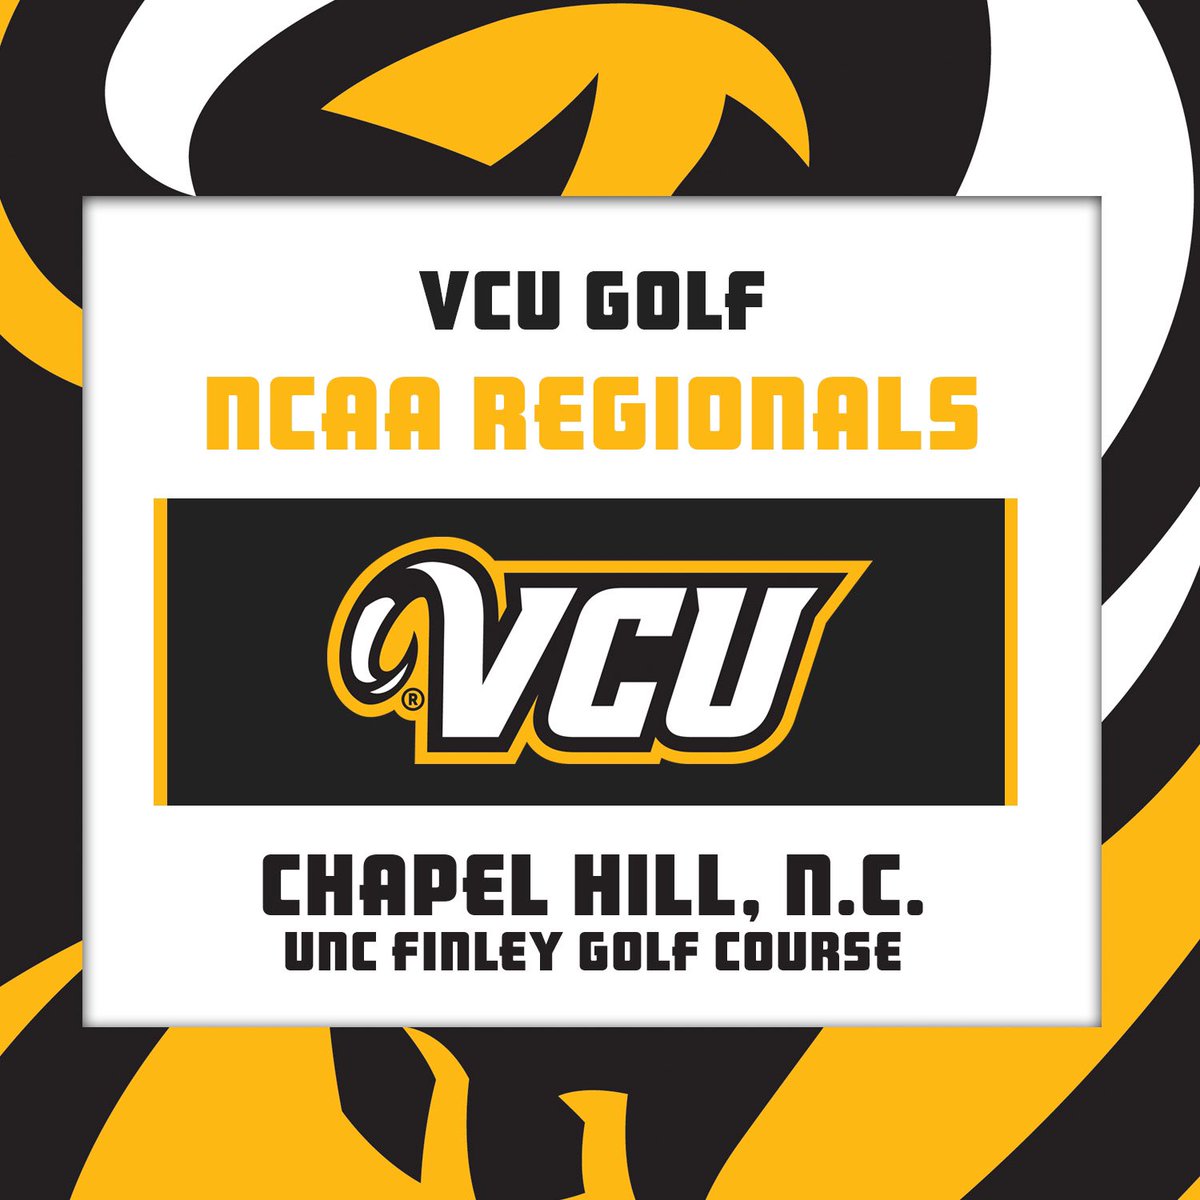 We’re headed to Chapel Hill for the NCAA Regional round May 13-15! #LetsGoVCU